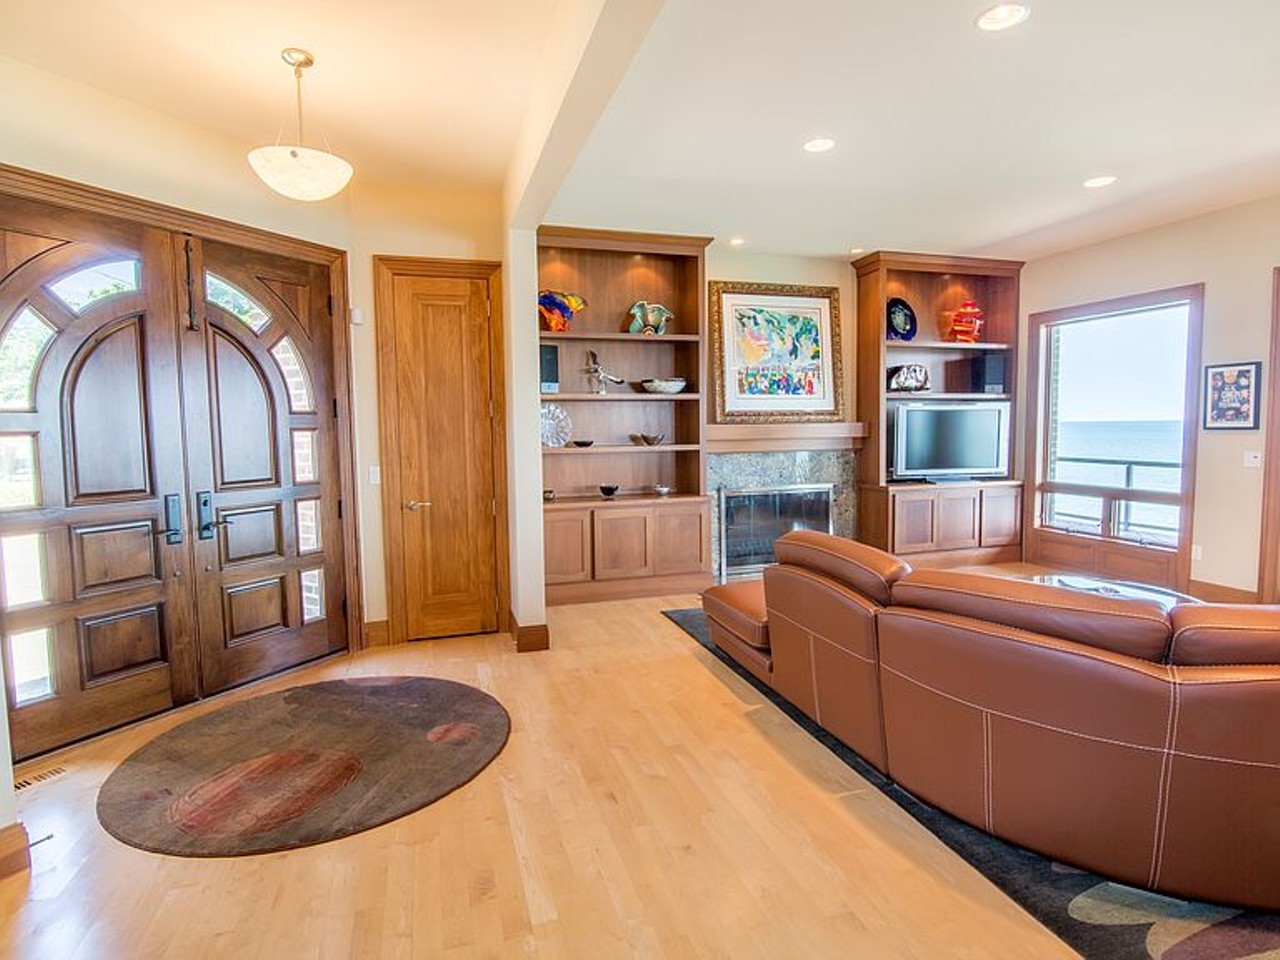 Get Your Own Private Beach and Decorative Gondola With This $1.5 Million Avon Lake Mansion